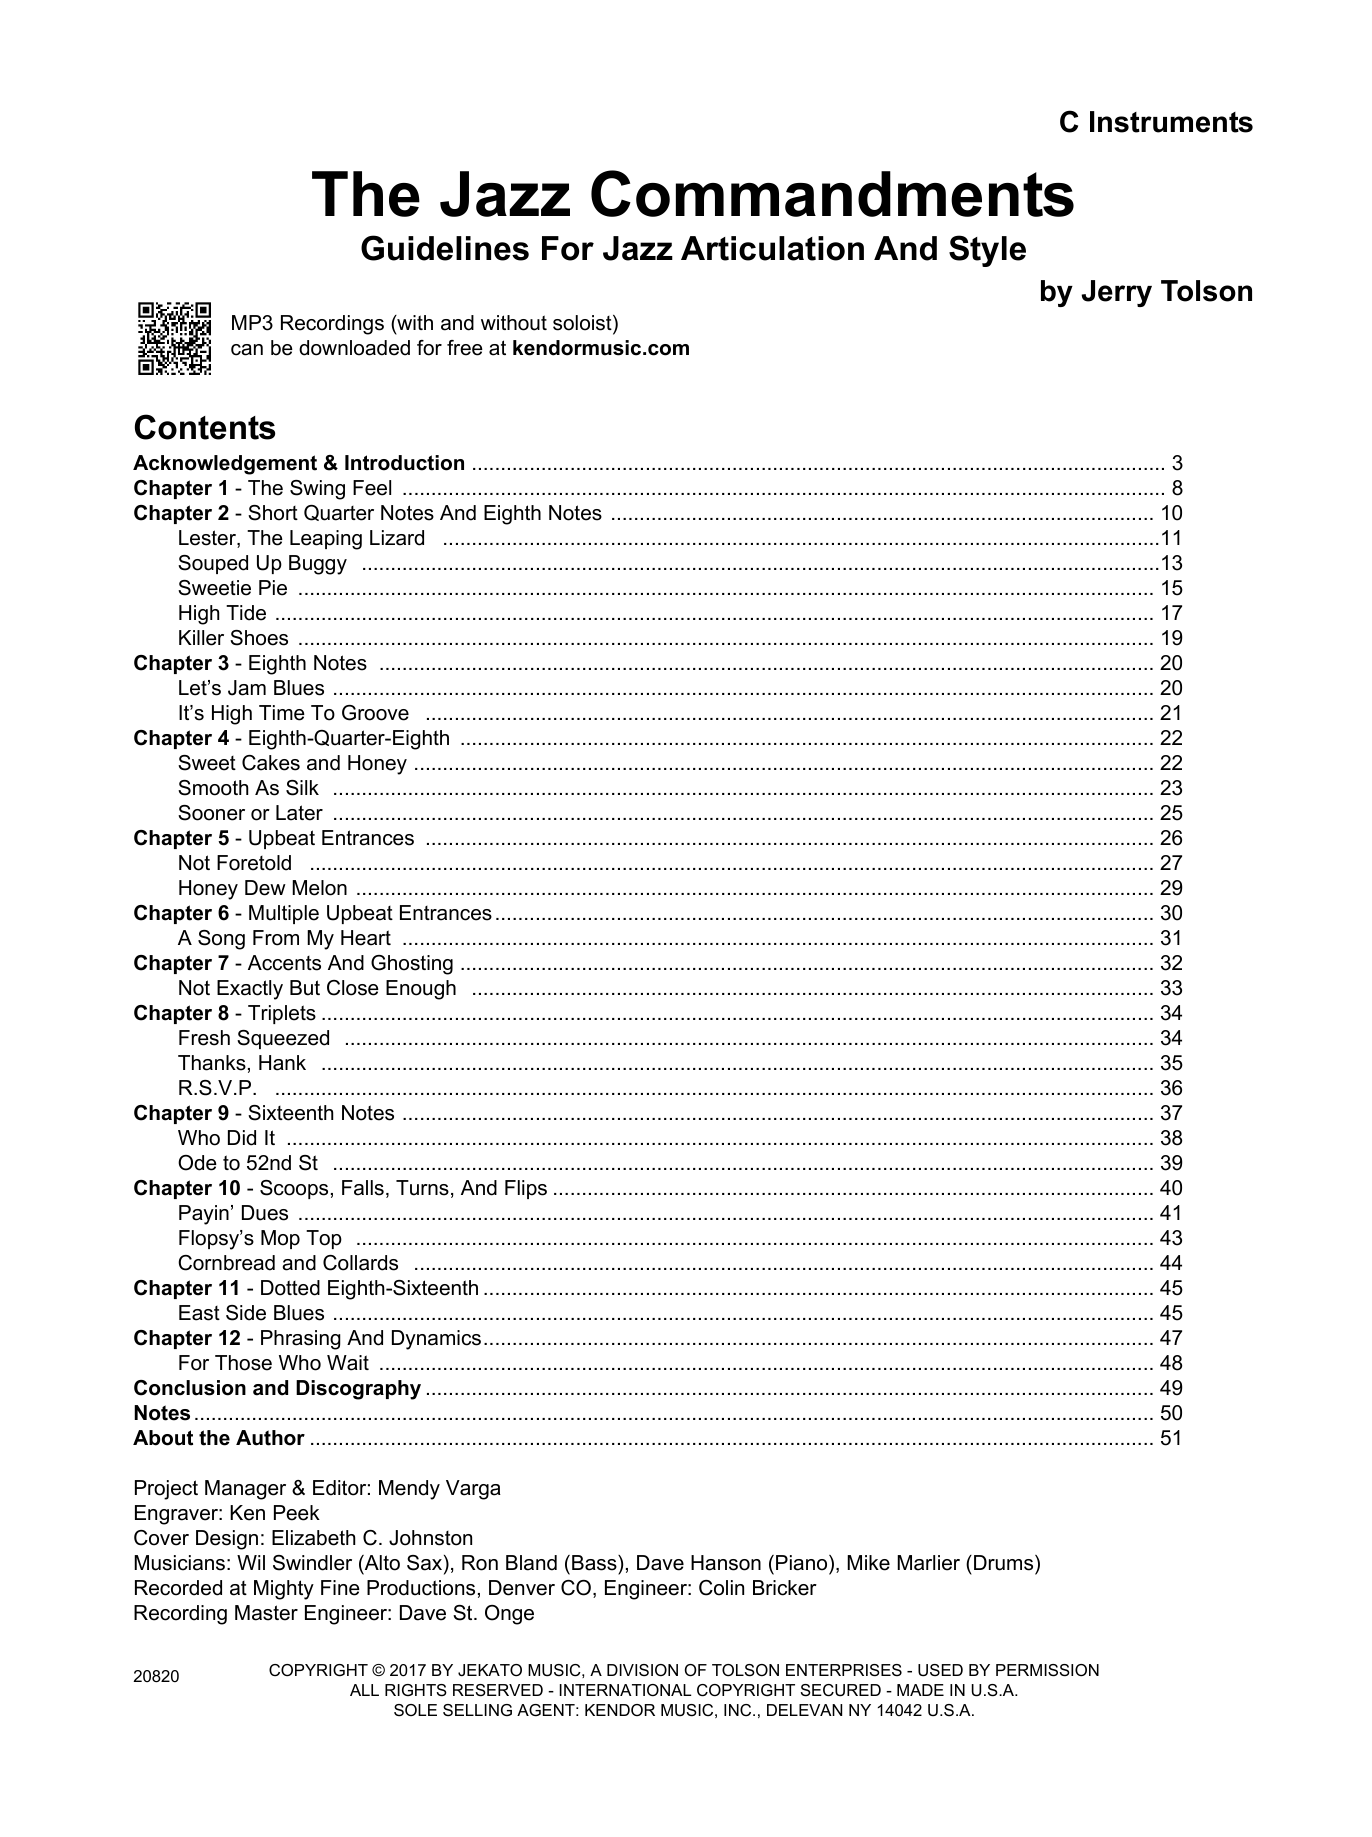 Download Jerry Tolson The Jazz Commandments (Guidelines For J Sheet Music